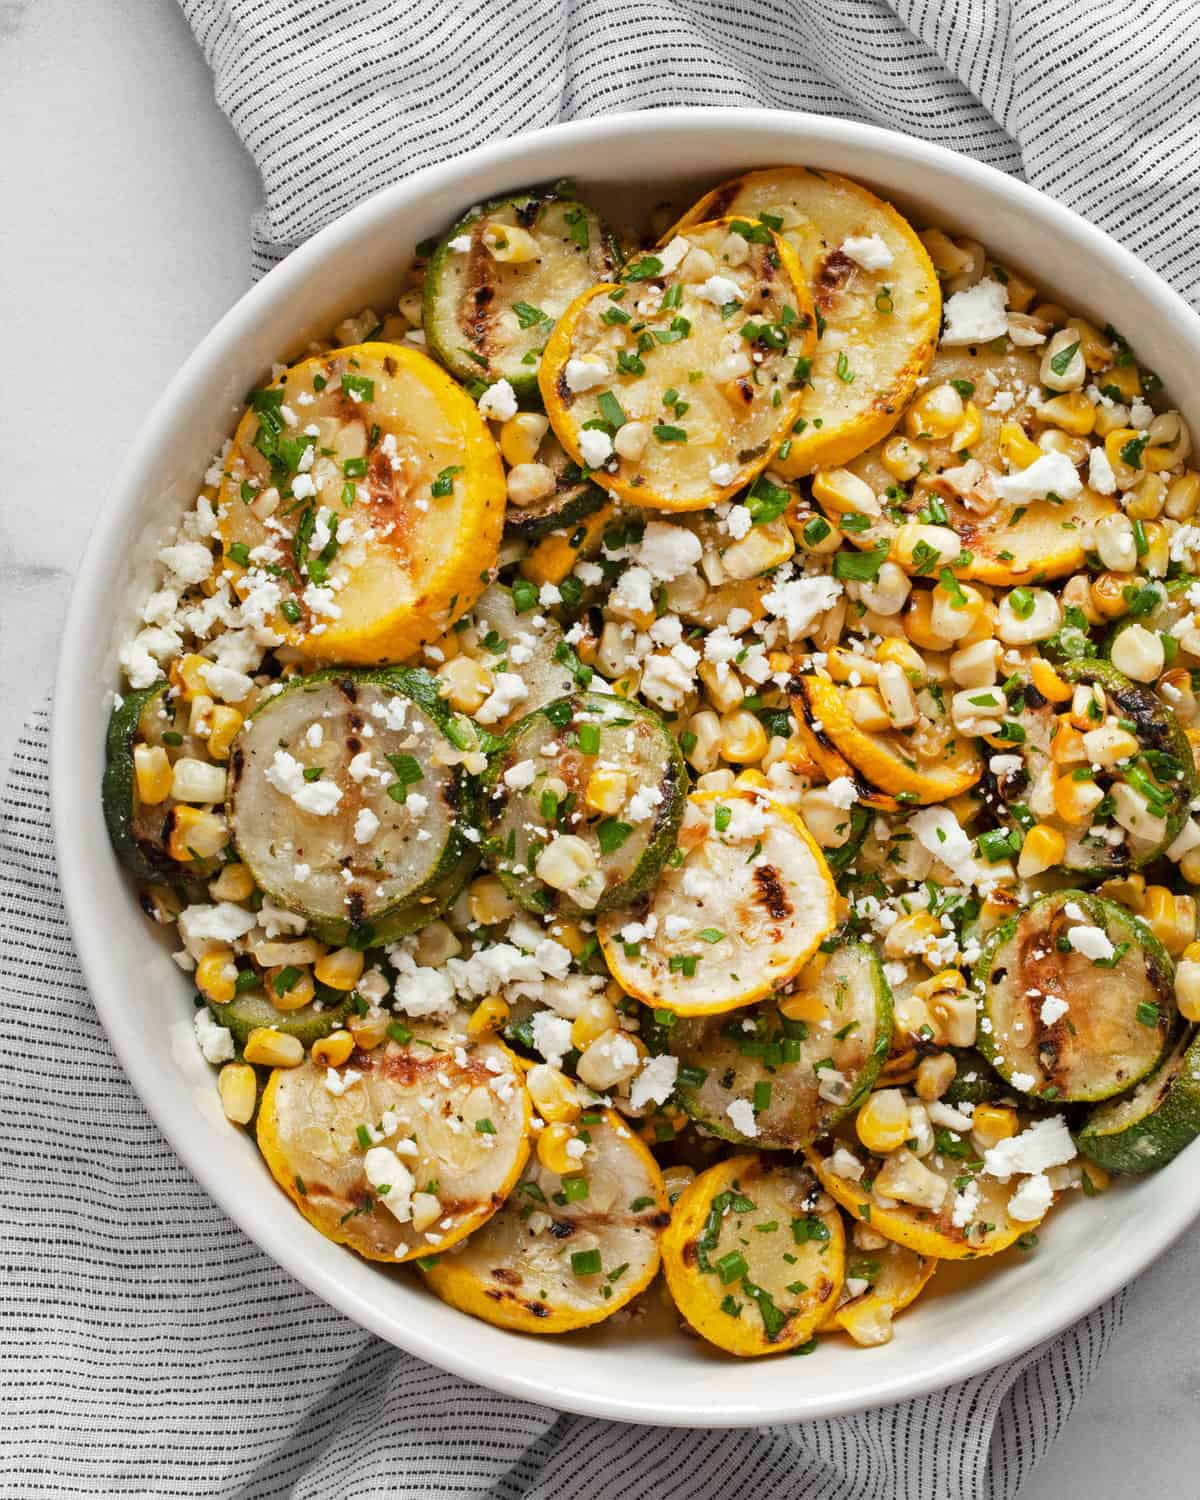 Grilled Zucchini and Squash Recipe from https://www.lastingredient.com/